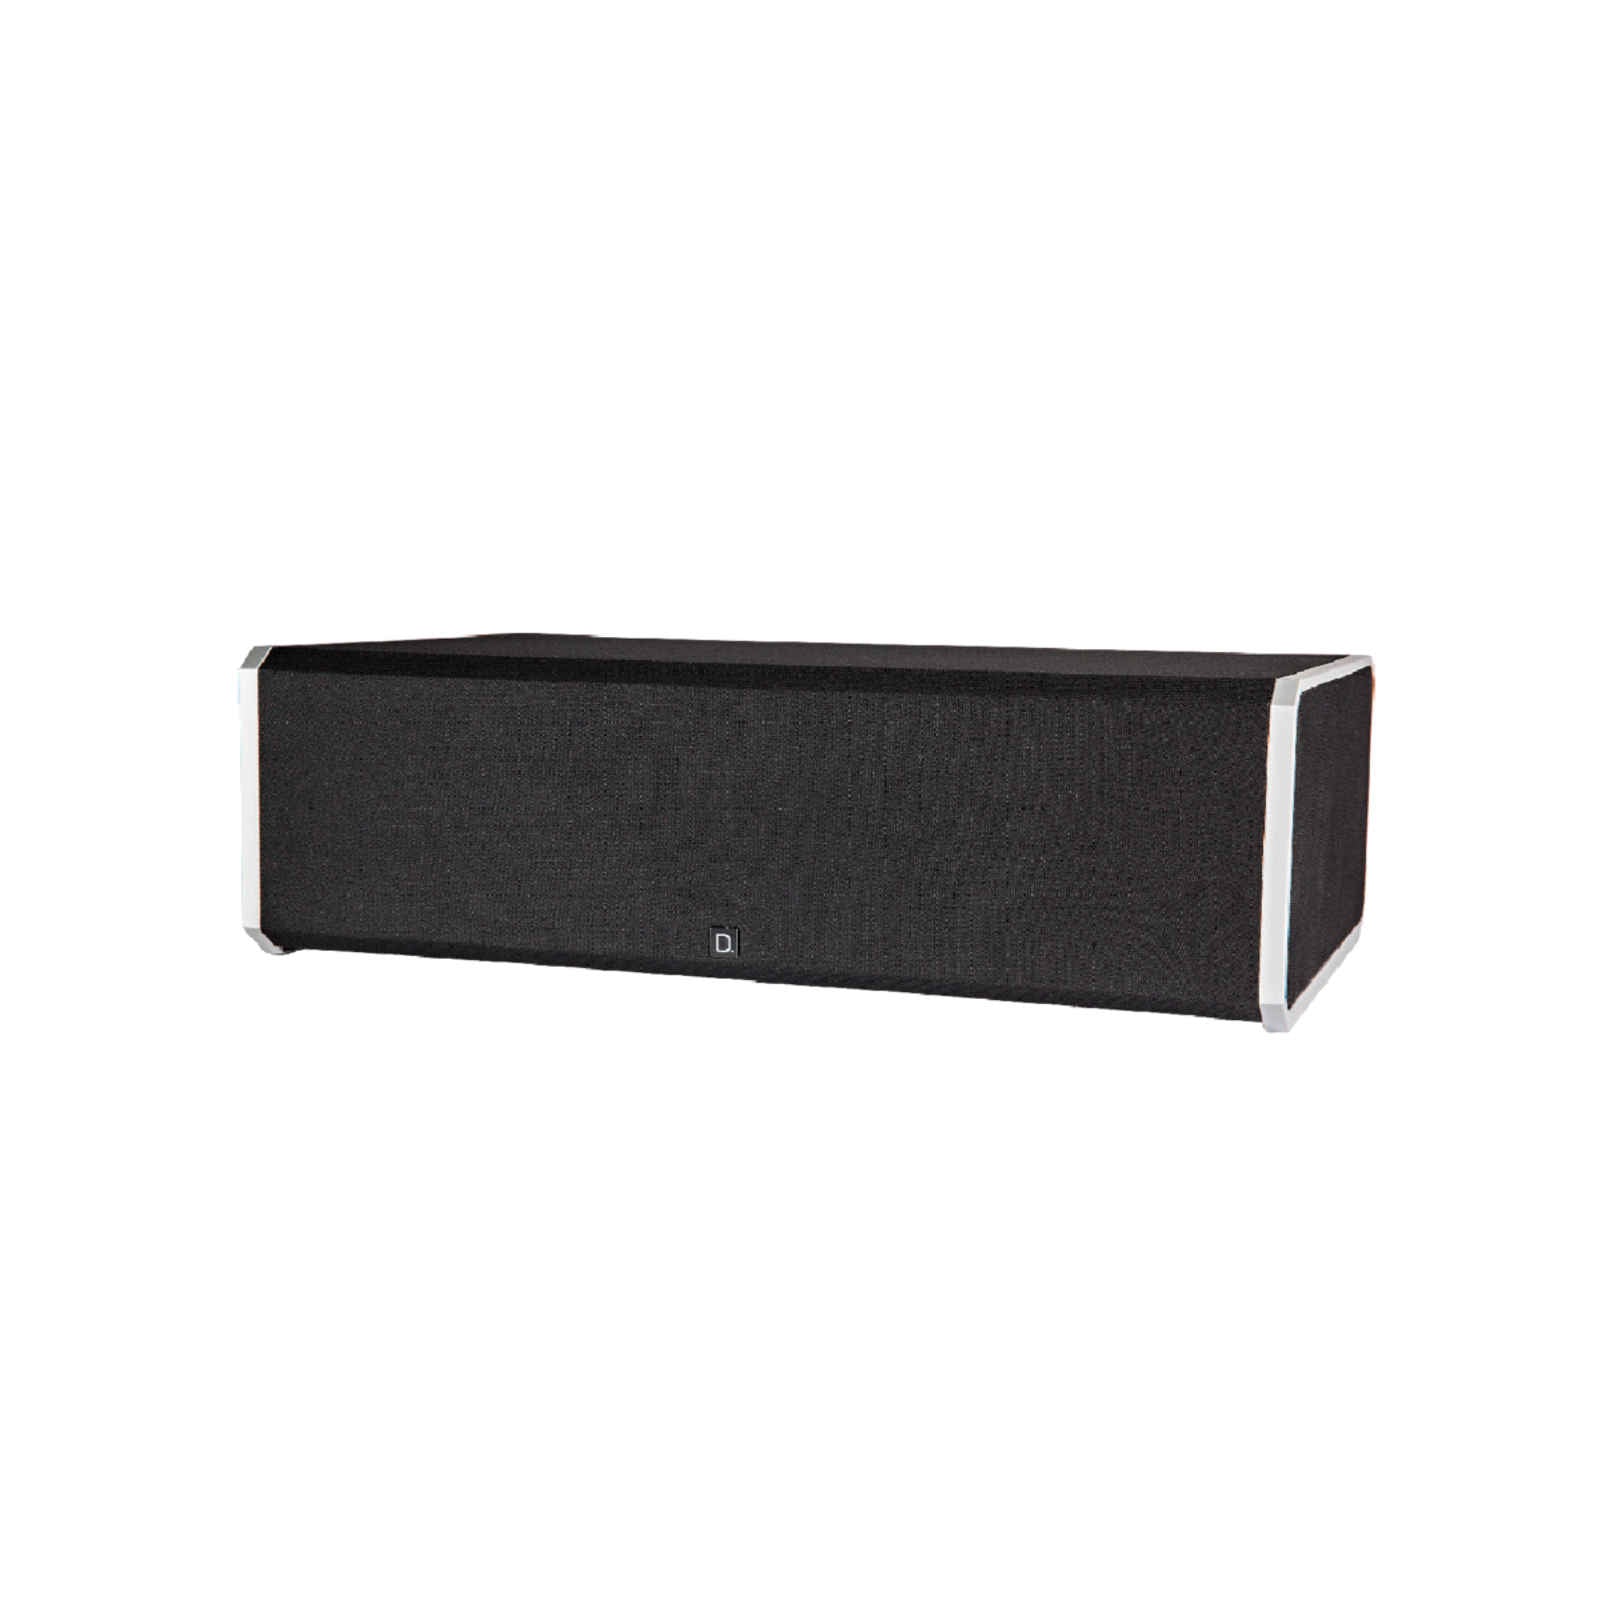 Definitive Technology CS9080 High-Performance Center Channel Speaker - Ooberpad India